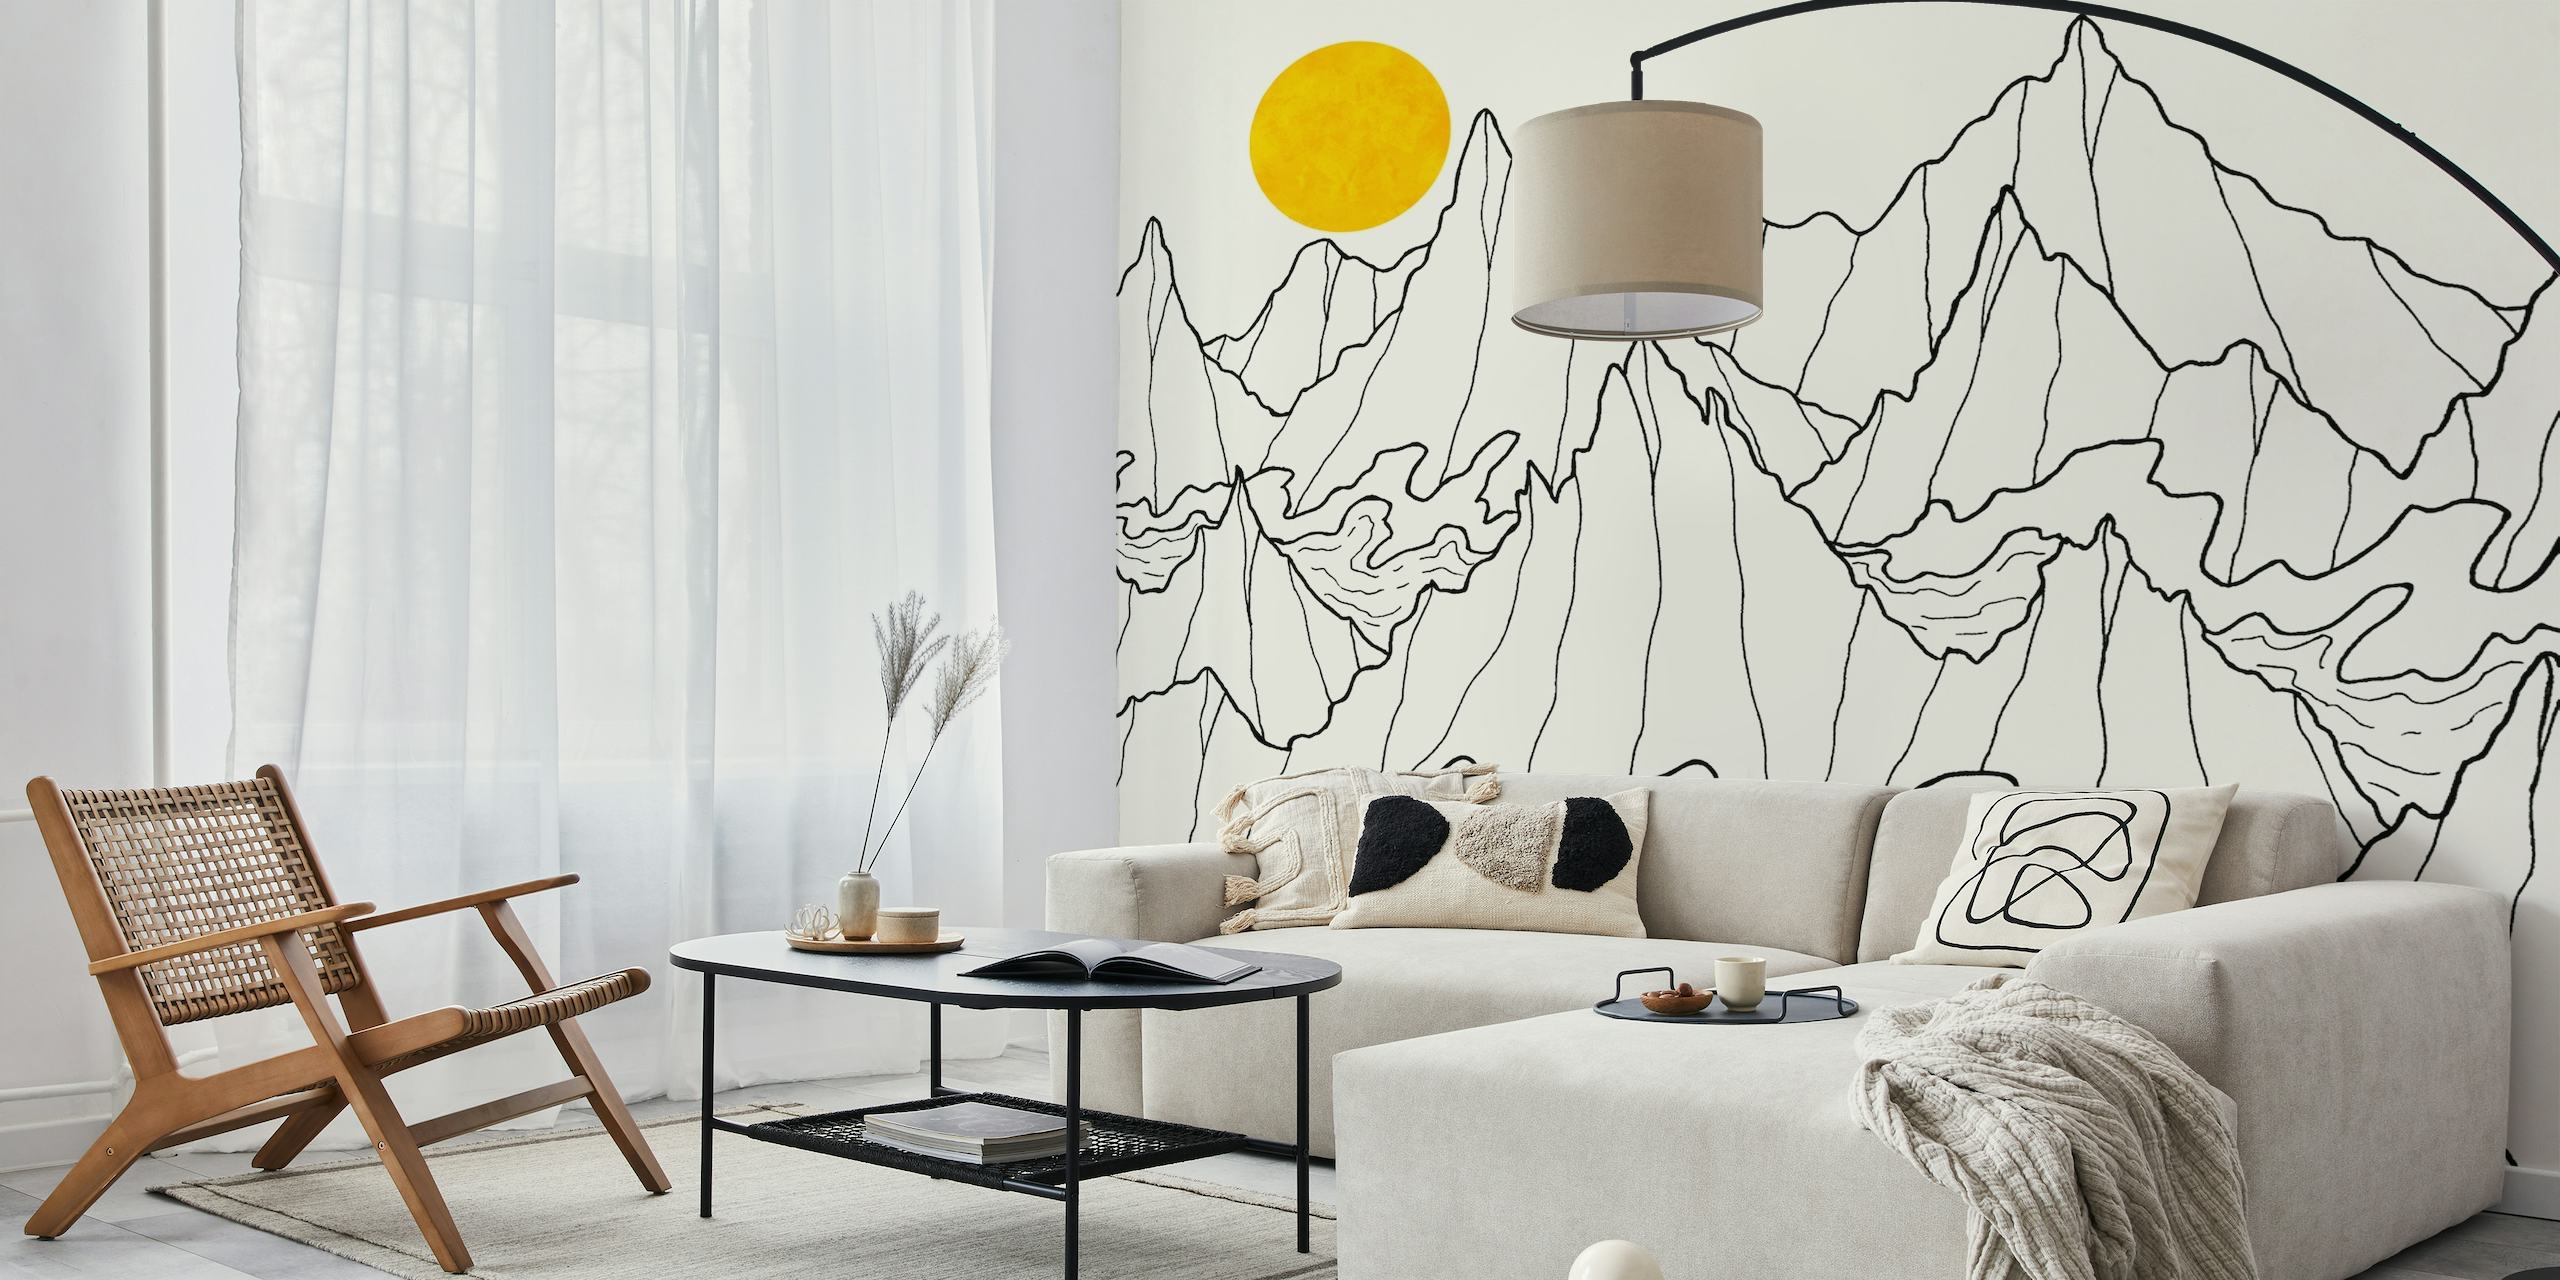 Line art style wall mural depicting a sun over ocean cliffs with waves